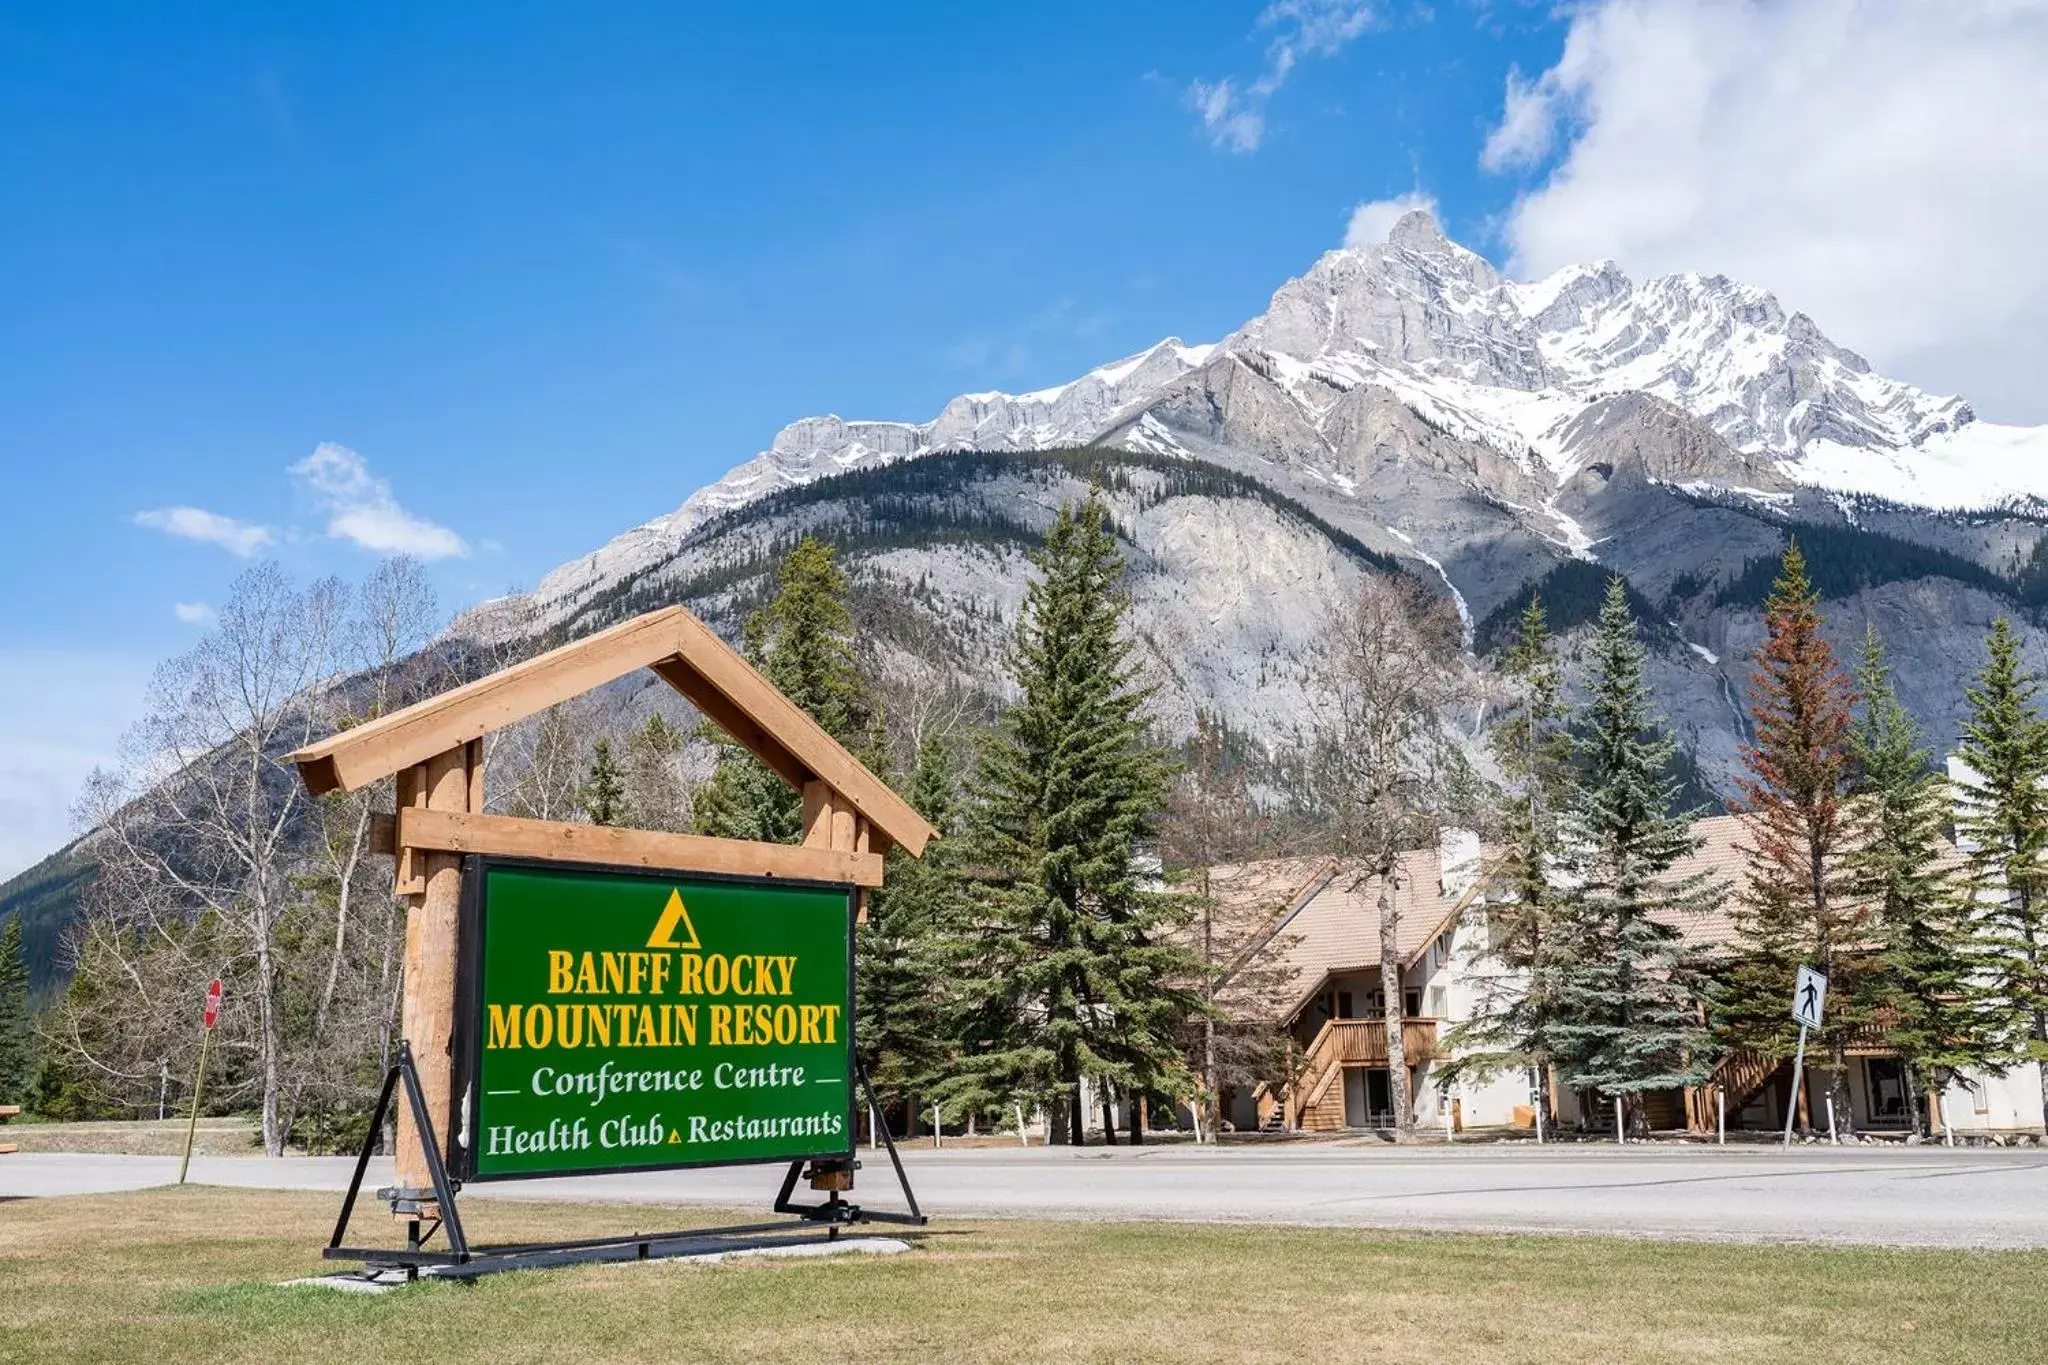 Property logo or sign, Winter in Banff Rocky Mountain Resort